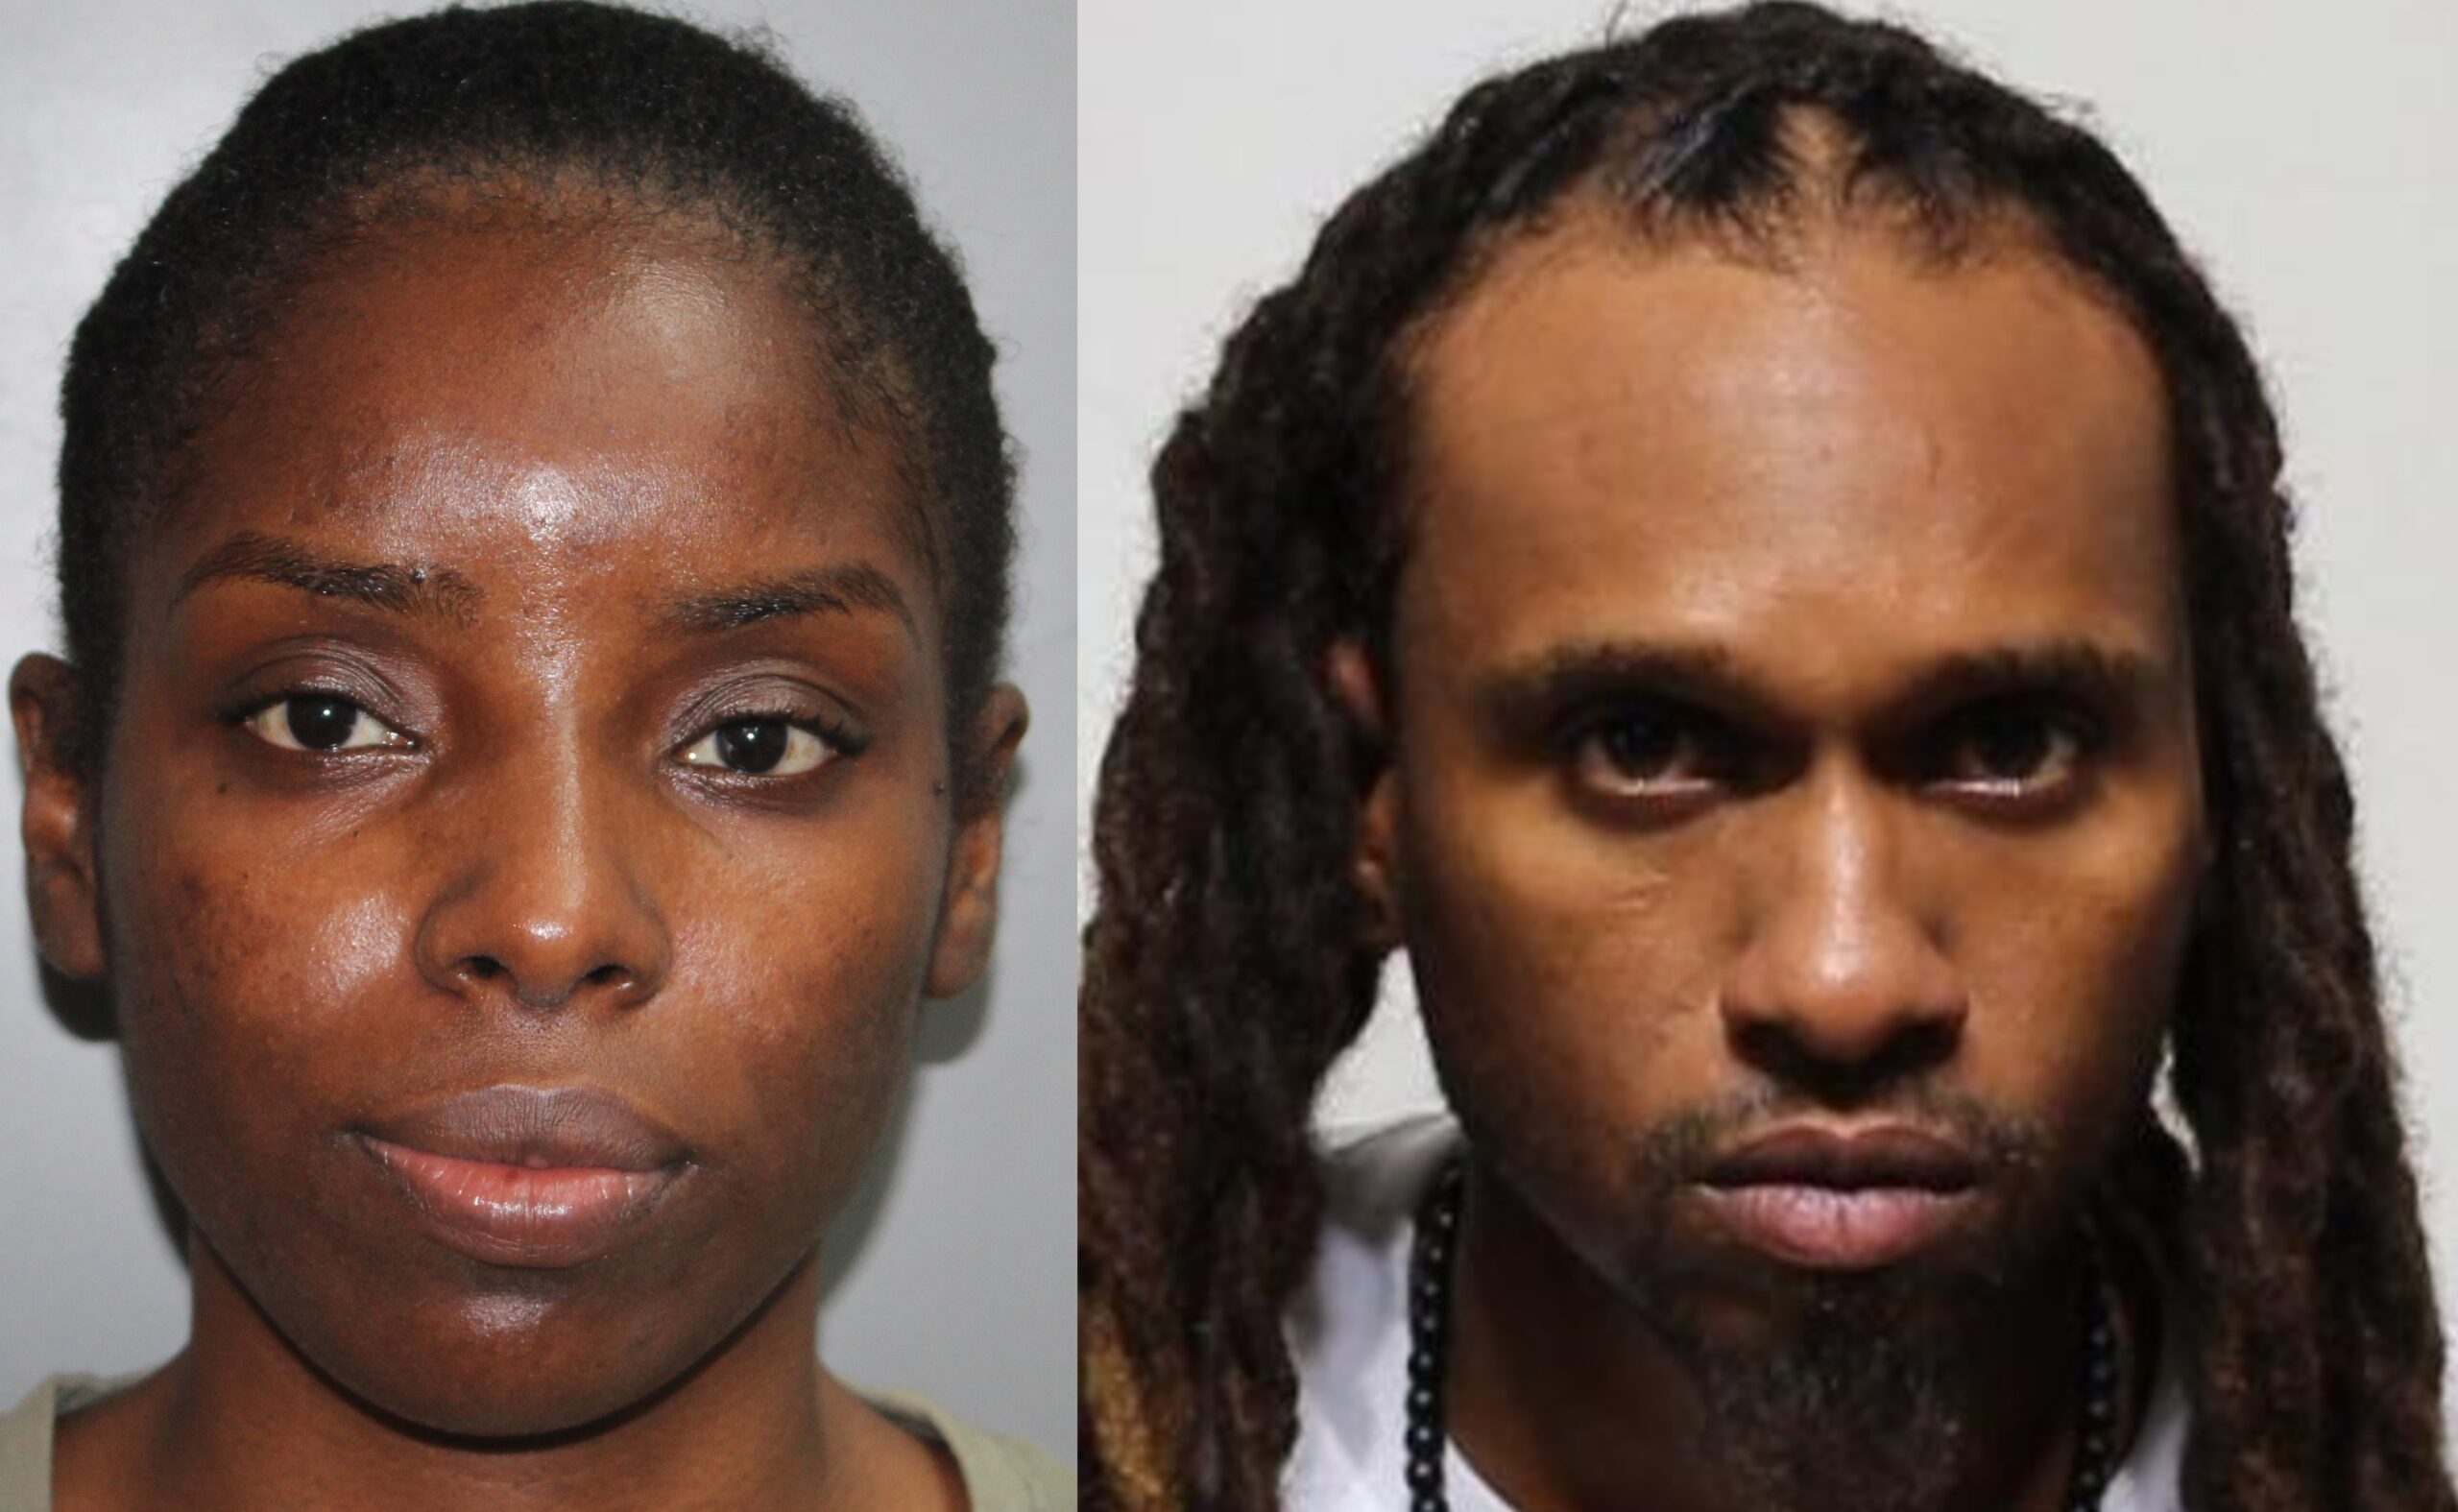 Crucian 'Bonnie and Clyde' Being Sought By Police After Recklessly Shooting At People In Mt. Pleasant West